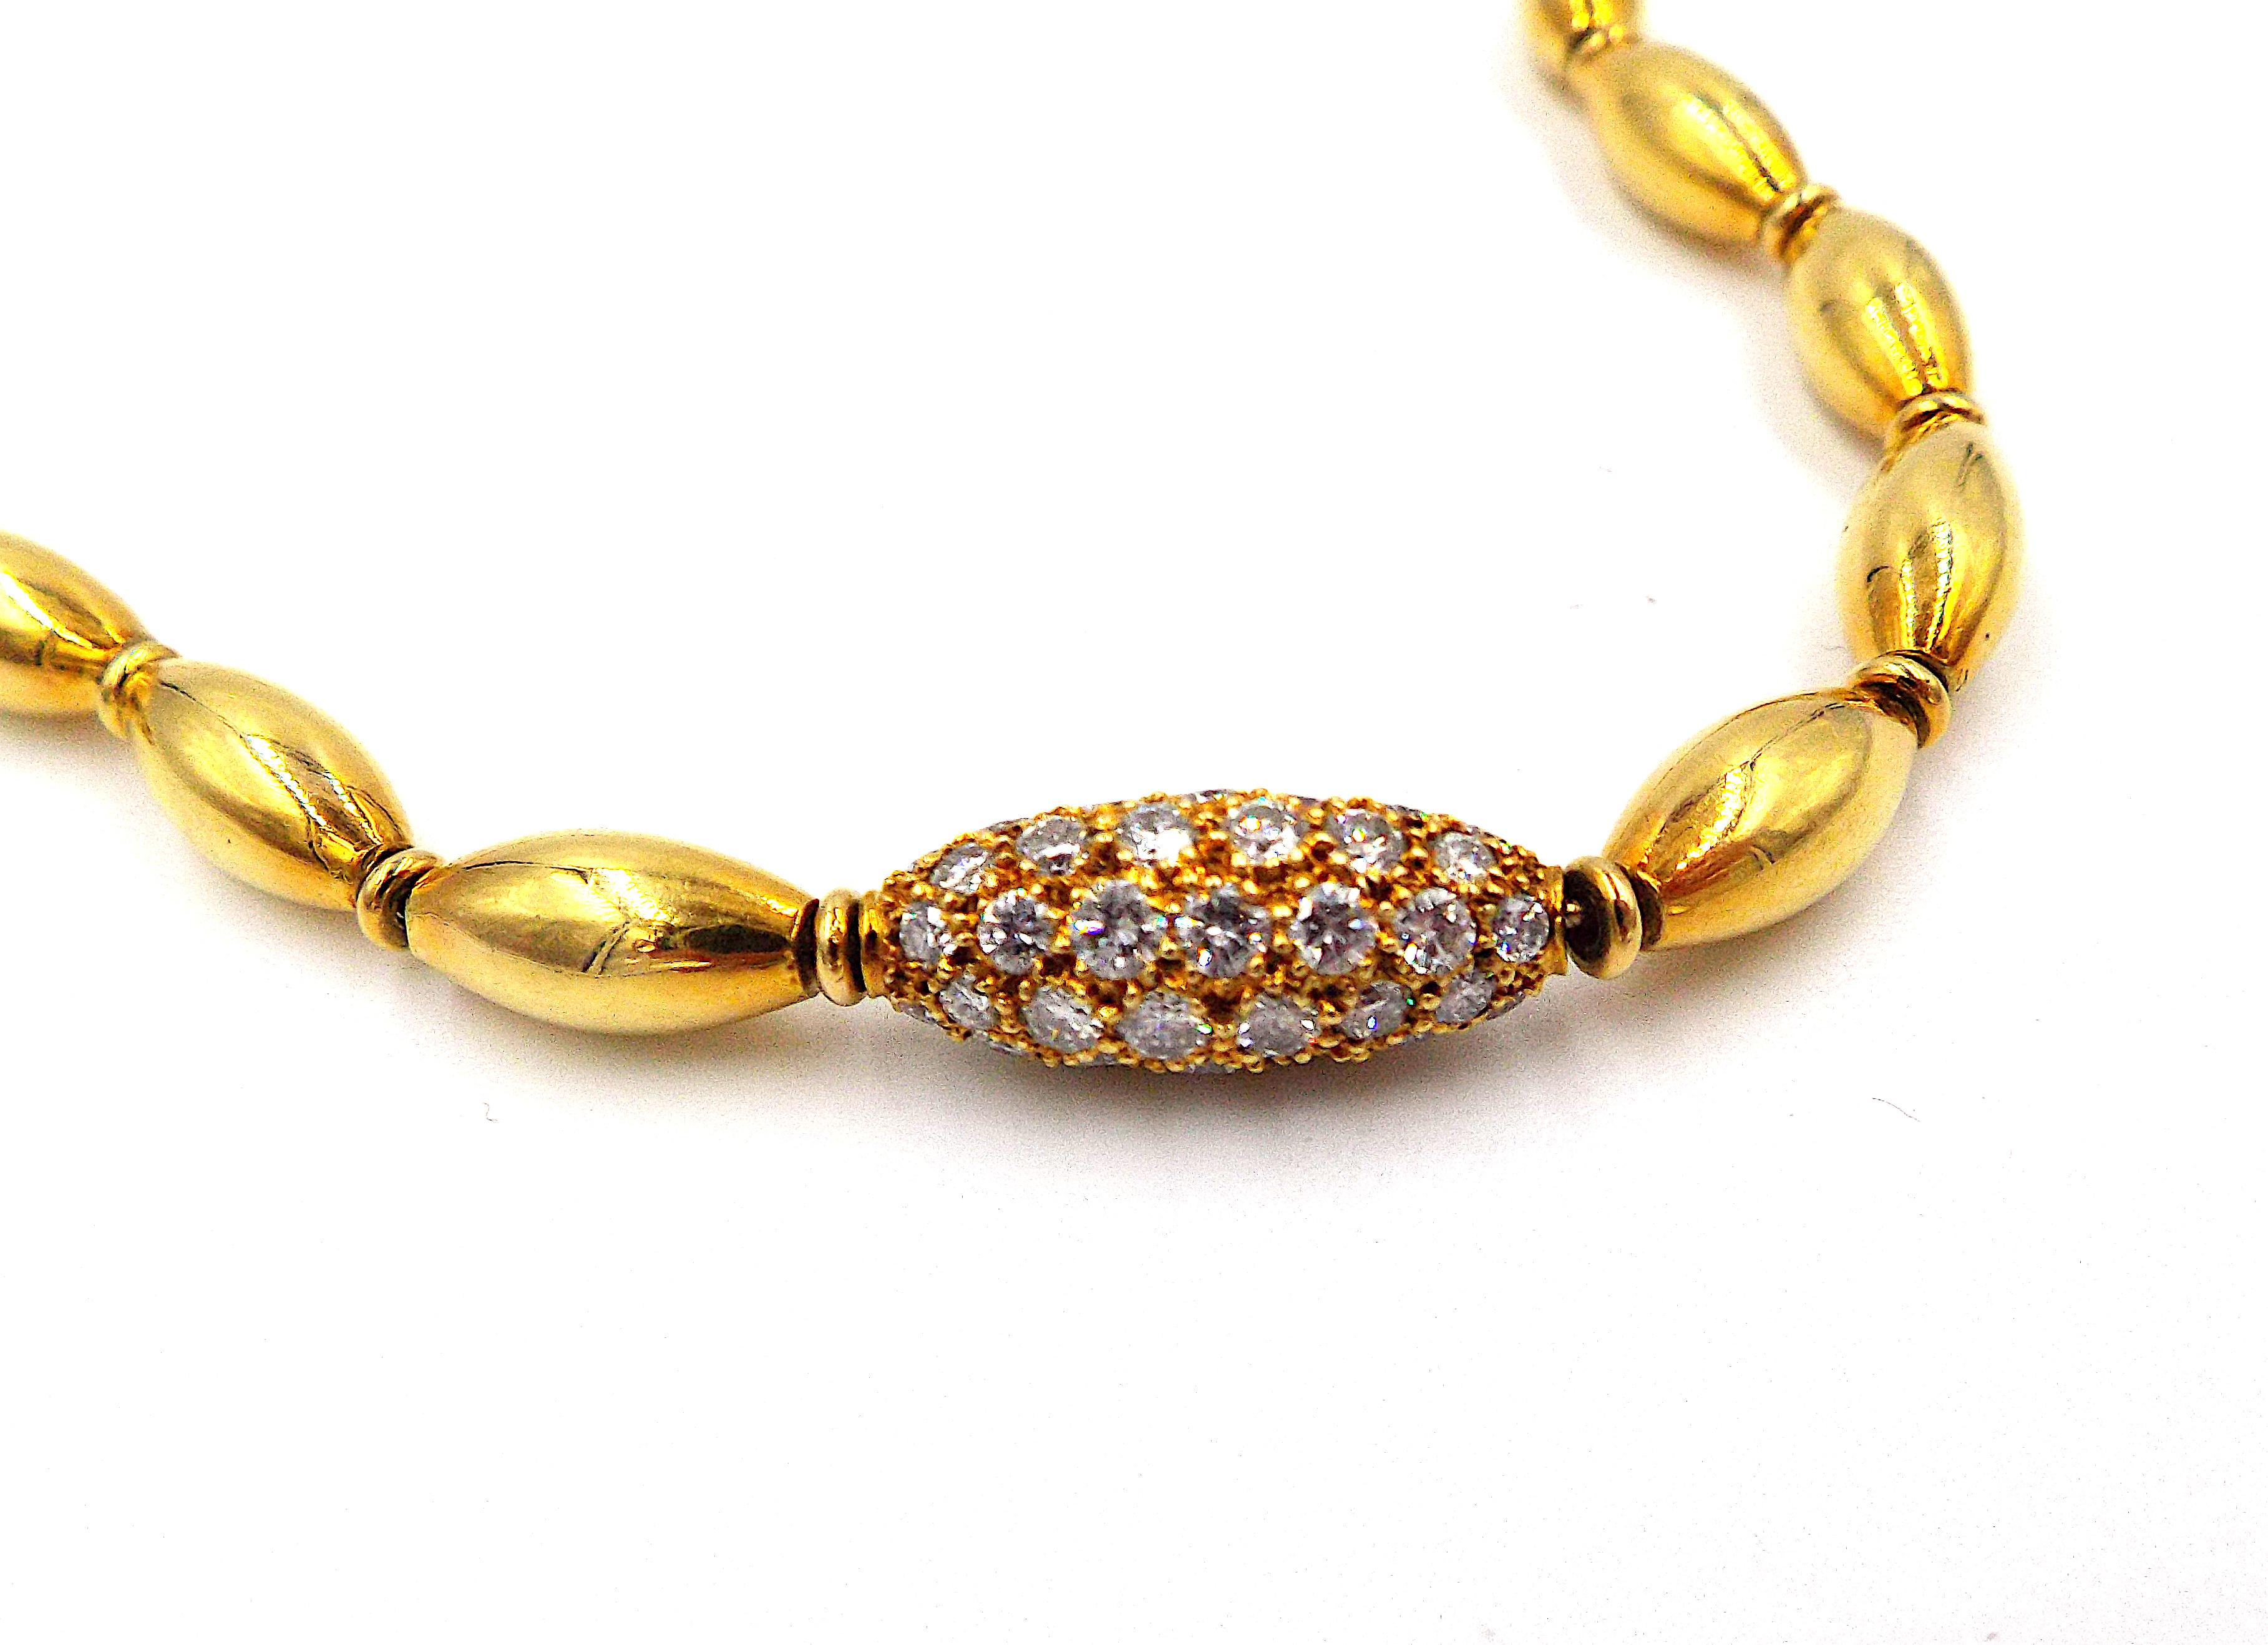 An elegant bead necklace by Van Cleef & Arpels. 18K yellow gold, approx. 4.95ct E-G/VS diamonds, lengths is ap. 19.5'', signed VCA, numbered.